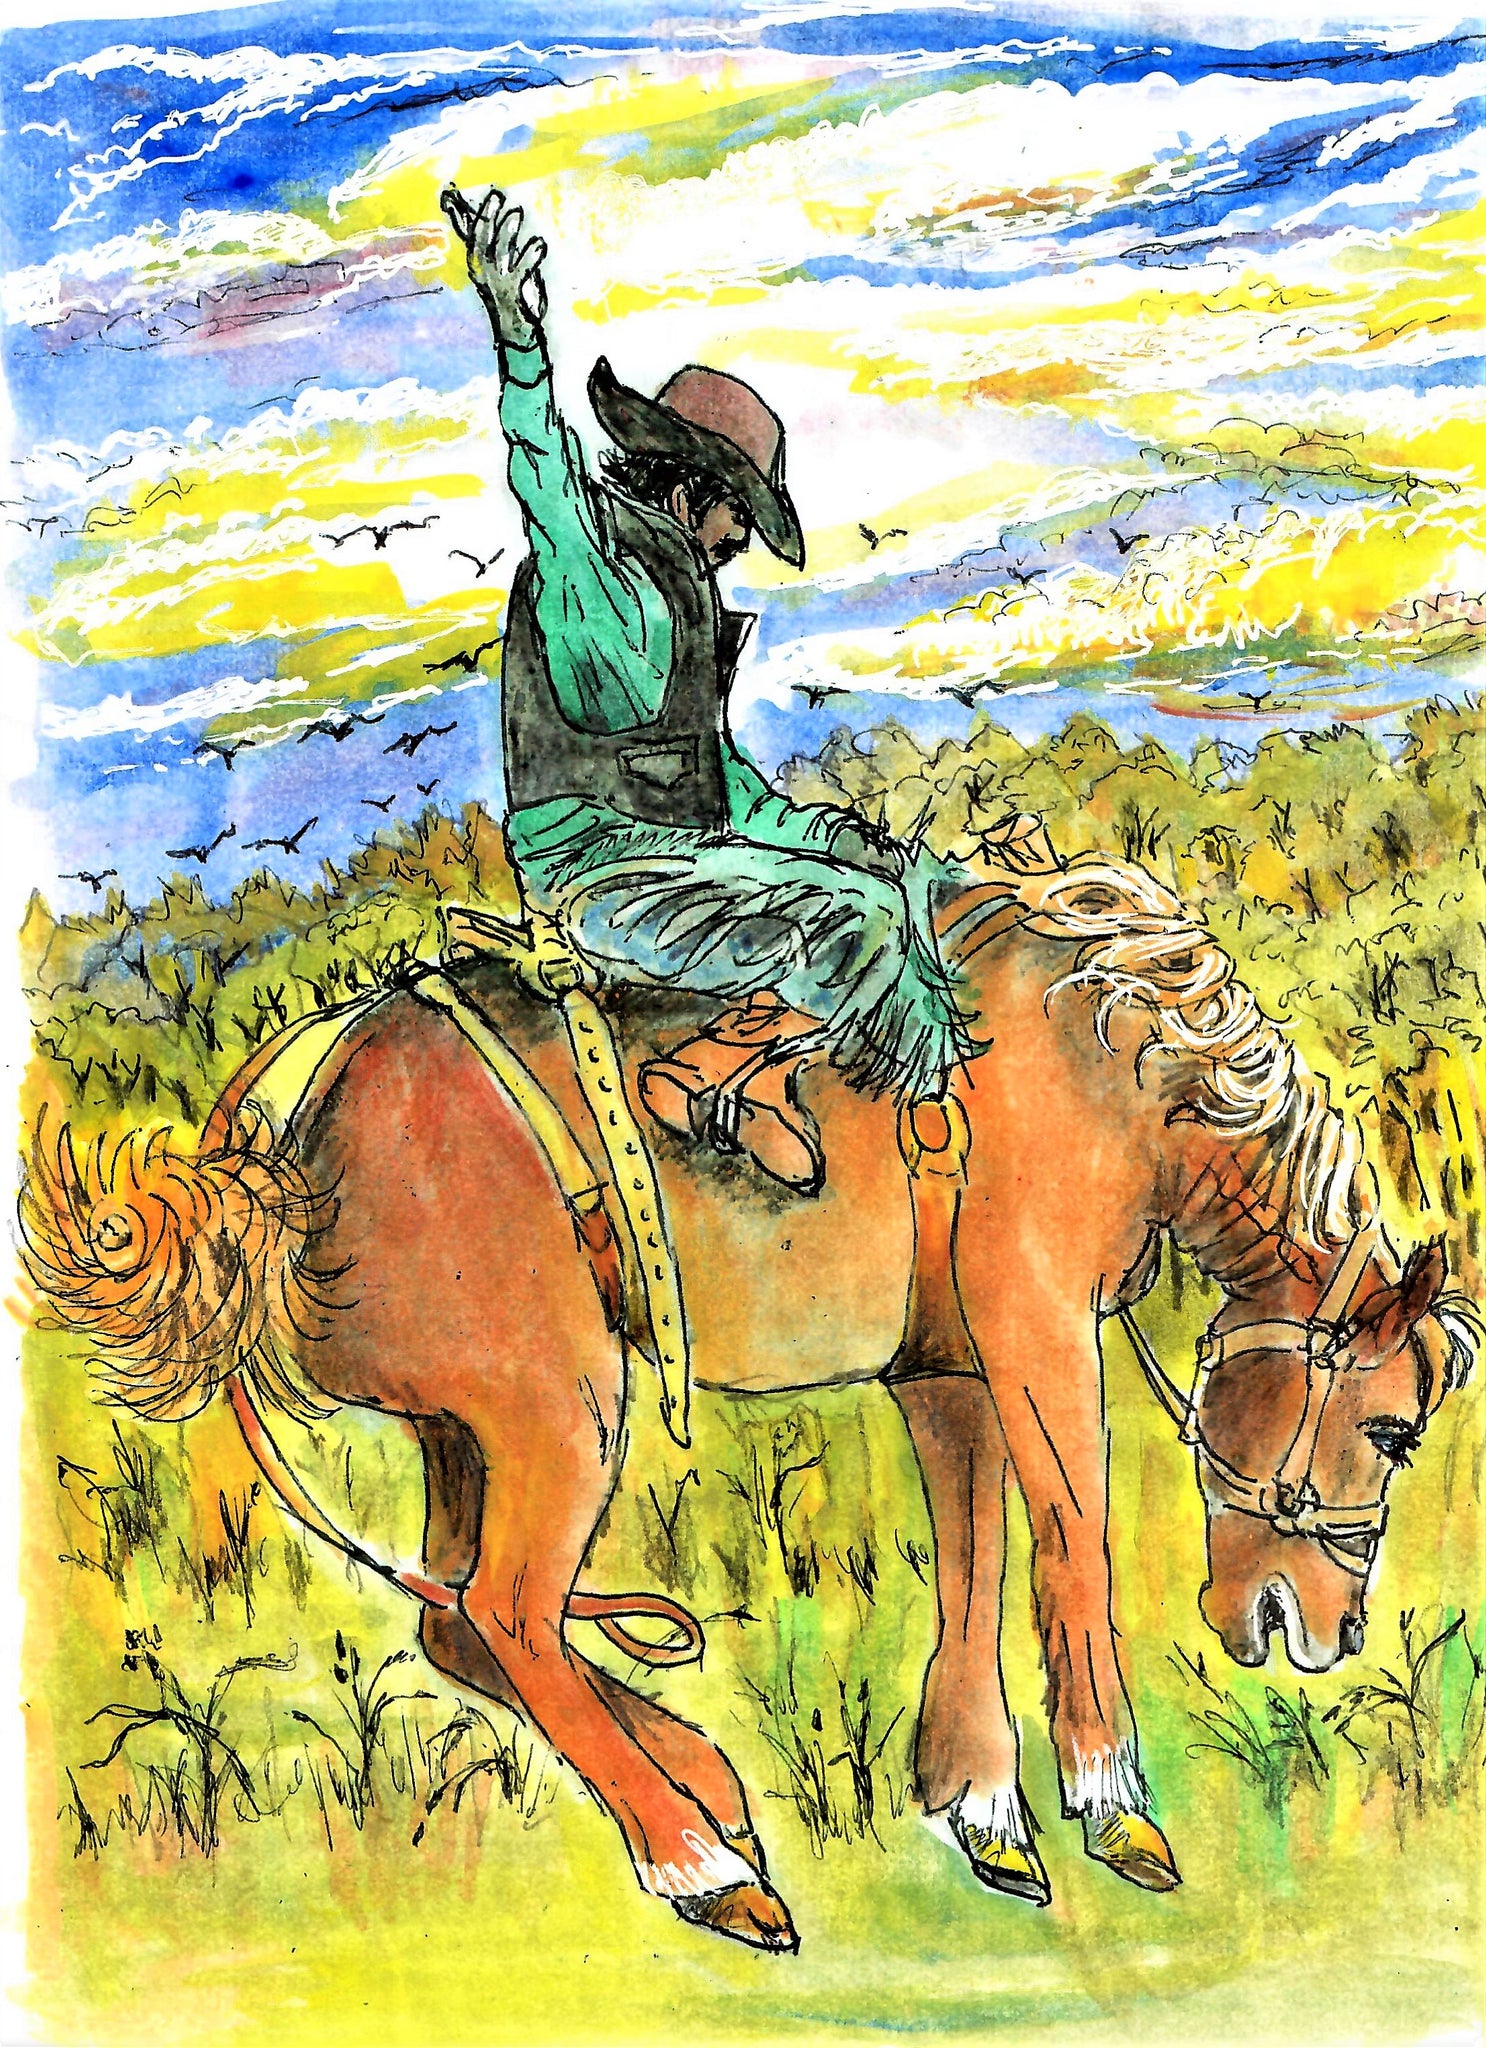 WESTERN - COWBOY ON A BUCKING HORSE IN THE COUNTRYSIDE